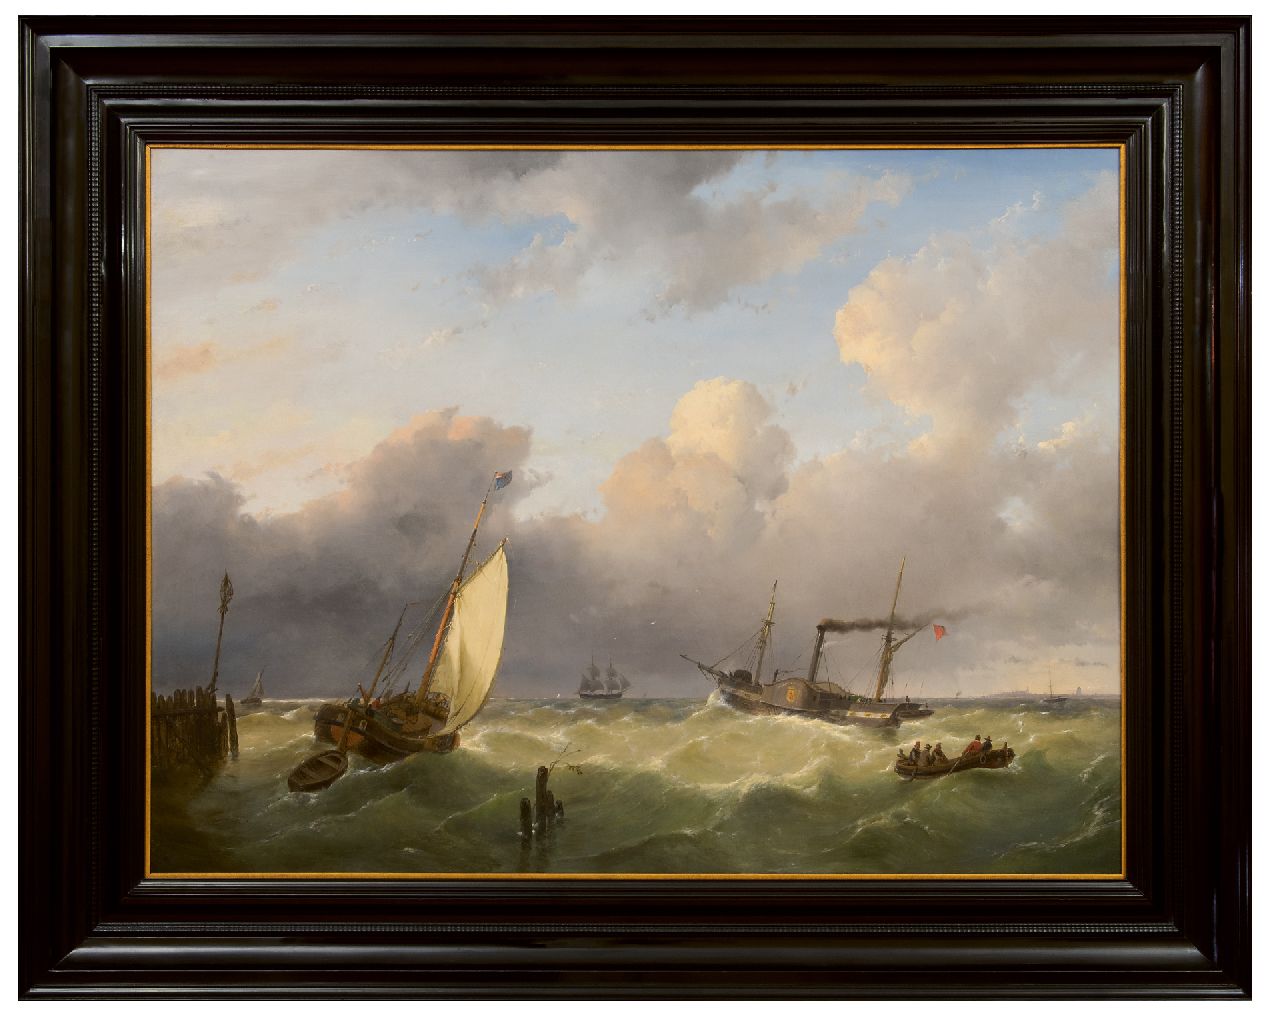 Schelfhout A.  | Andreas Schelfhout | Paintings offered for sale | Sailing vessels and a steamer on open water, oil on panel 67.6 x 90.6 cm, signed l.l. and dated 1845